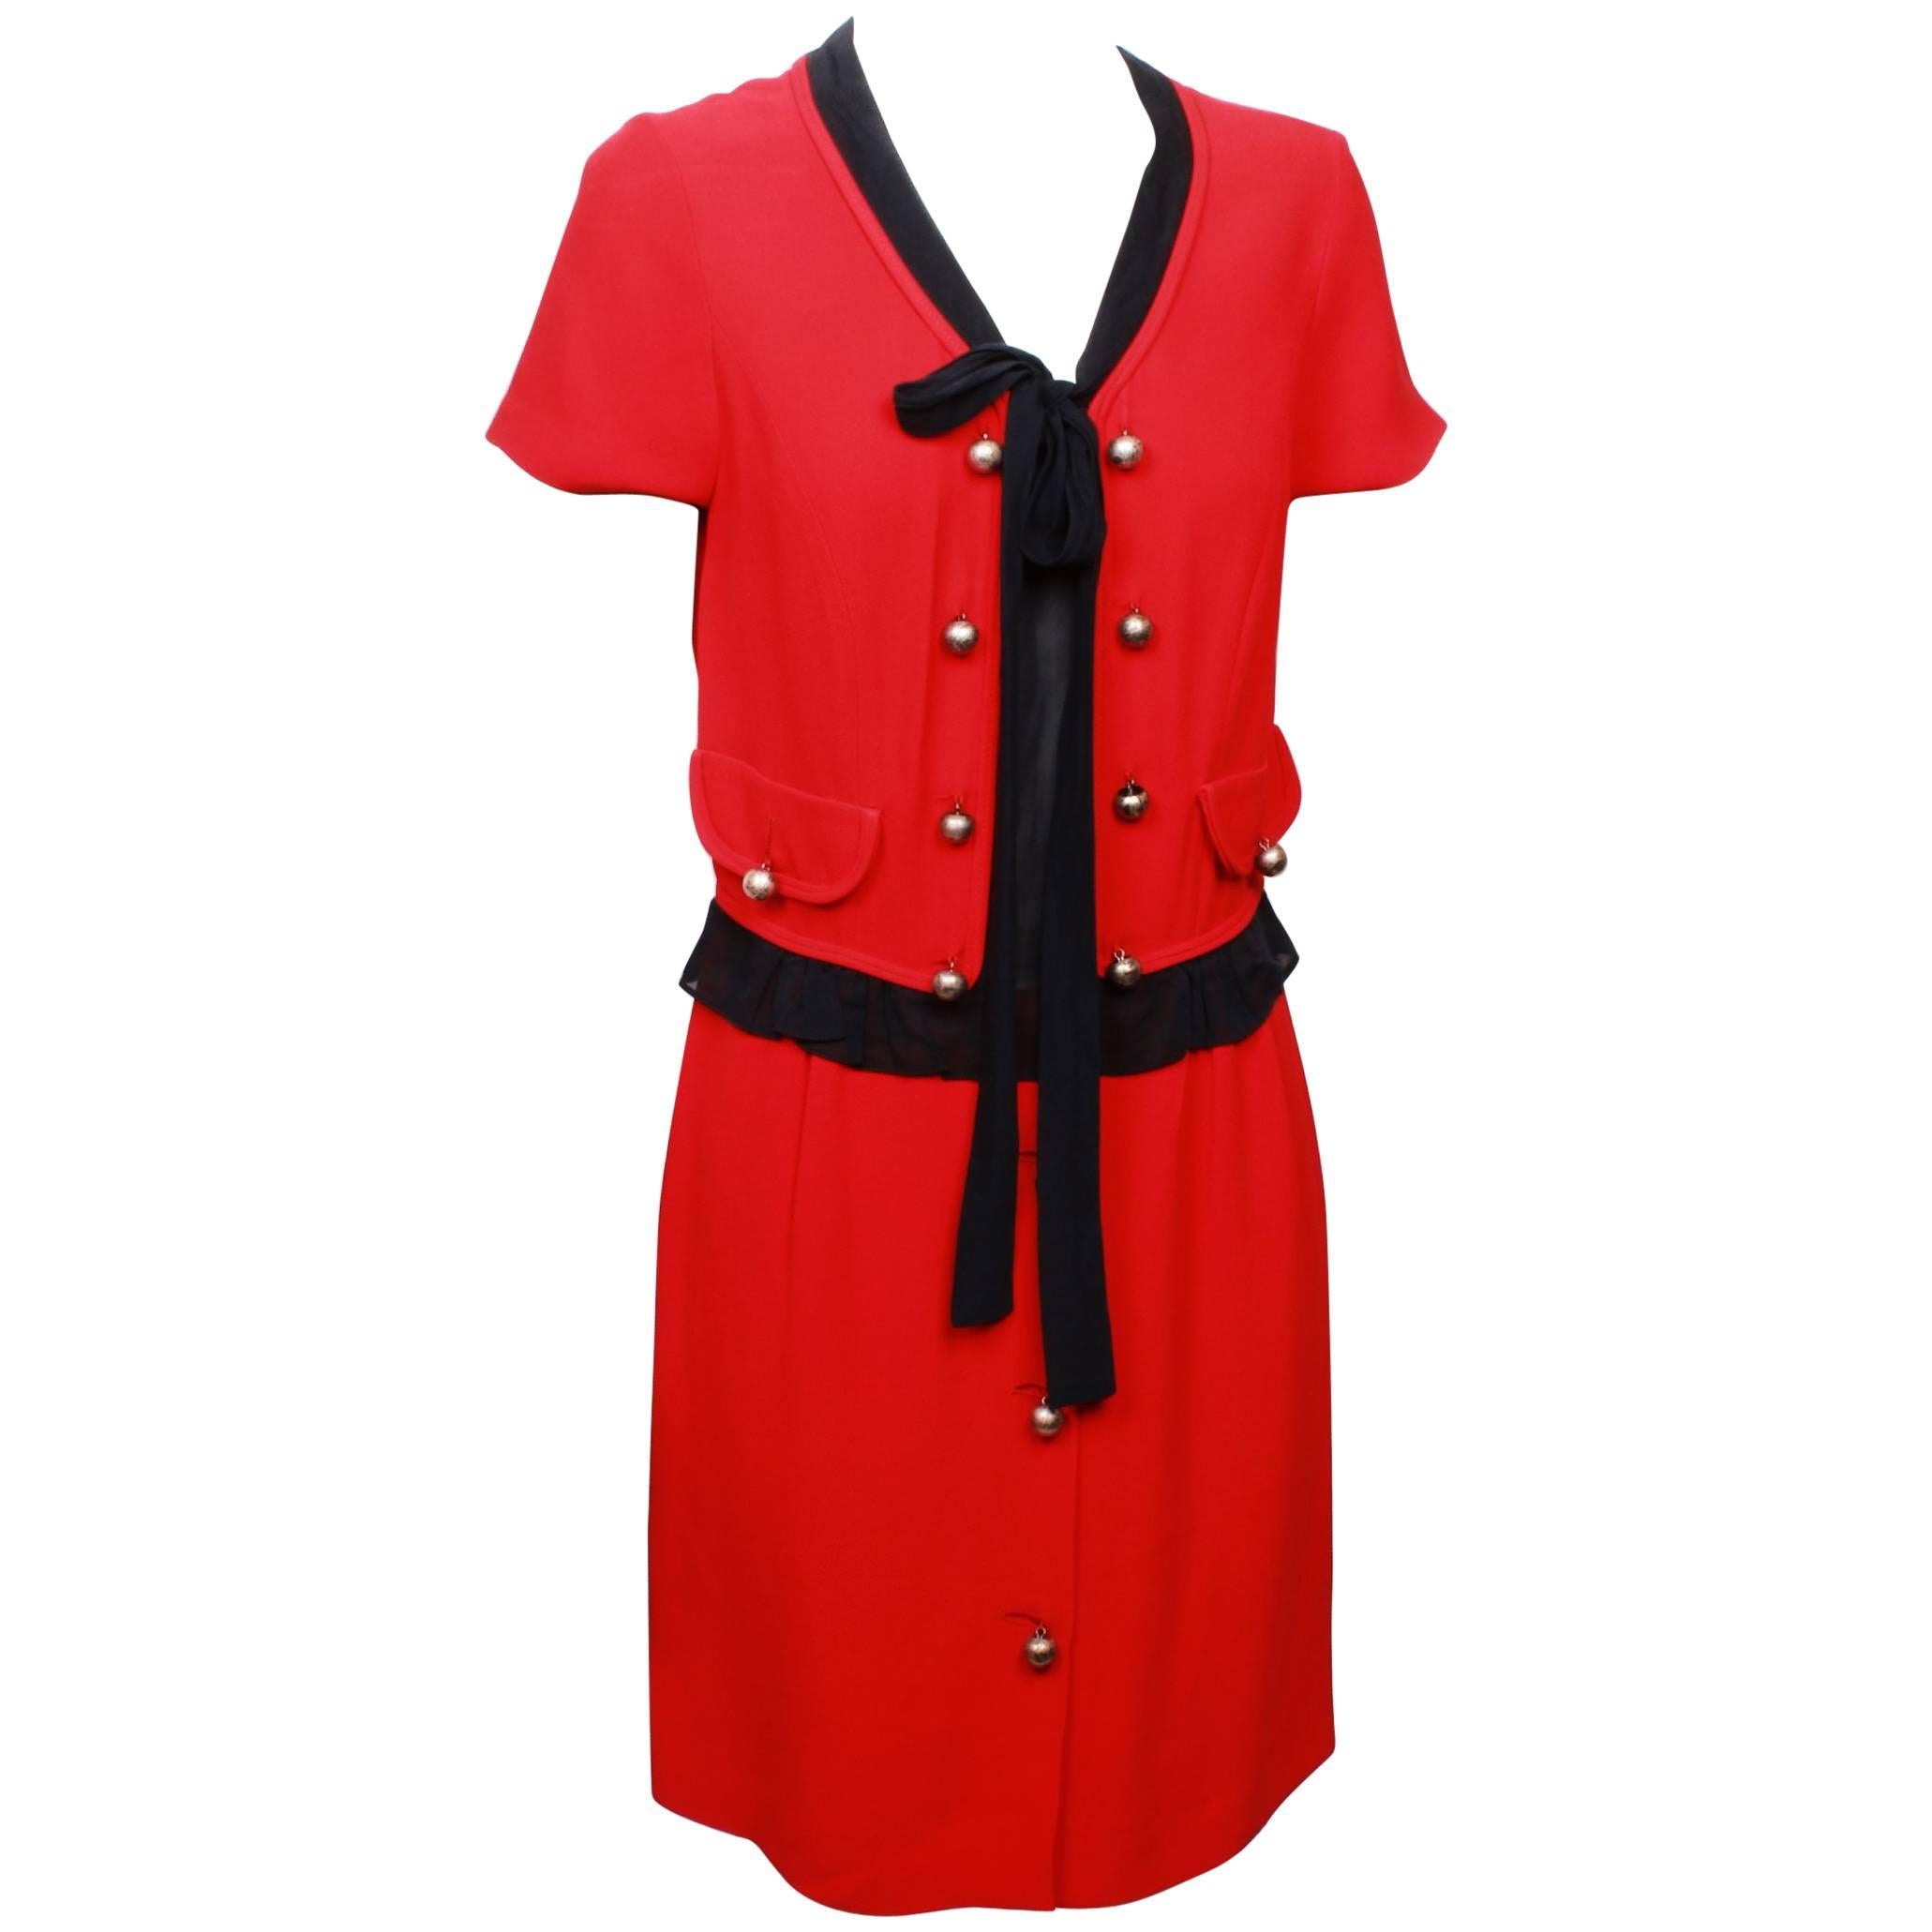 Moschino Cheap and Chic Red and Black Dress For Sale